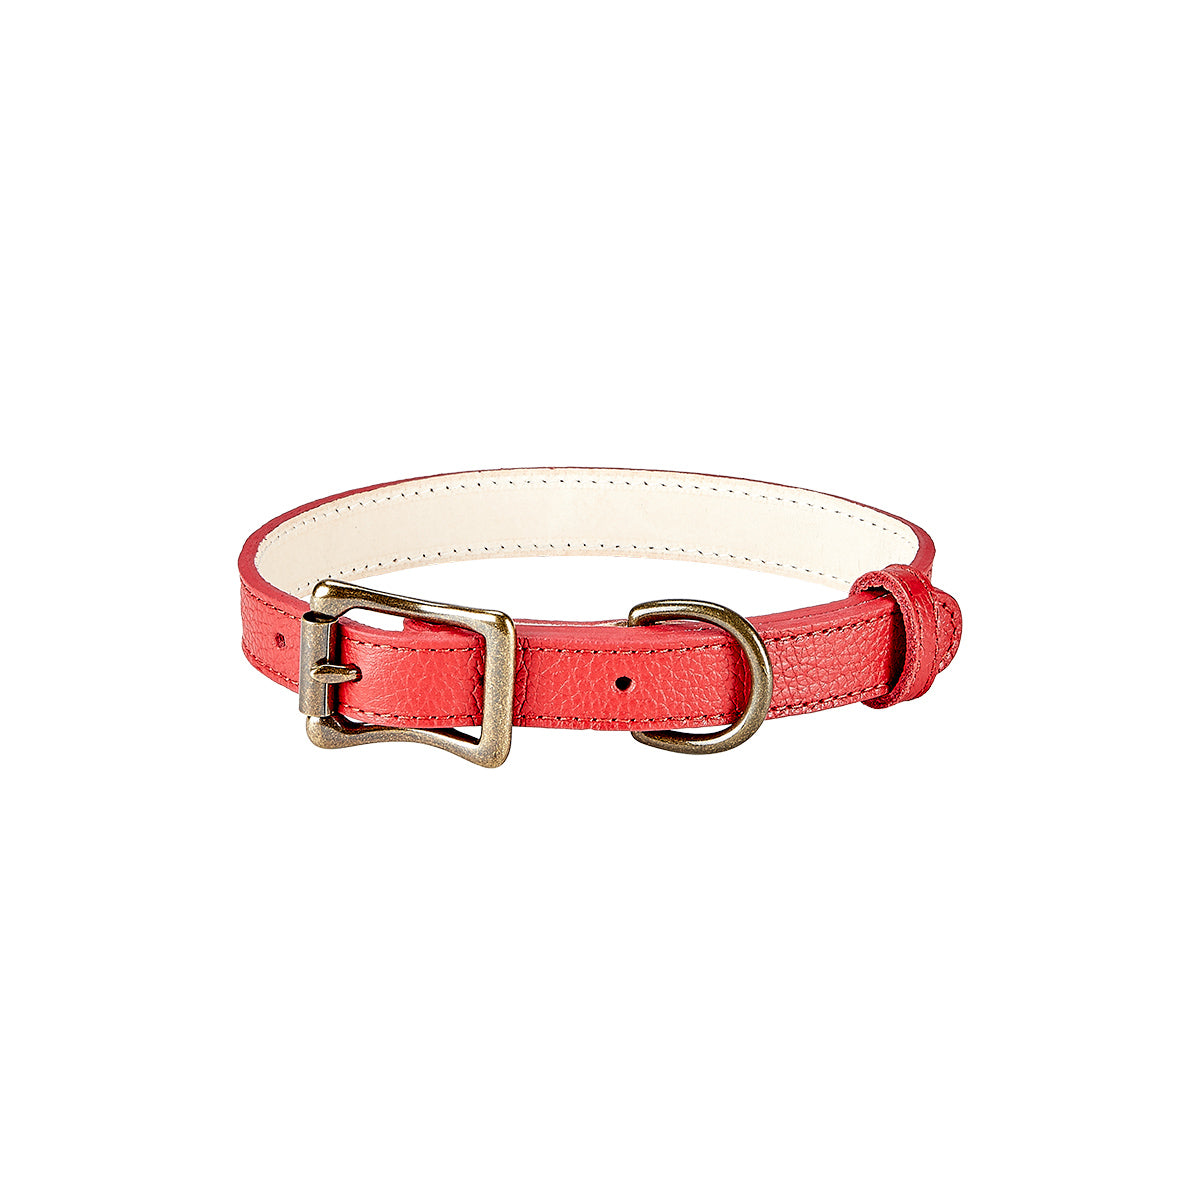 Graphic Image Small Dog Collar Red Pebble Grain Leather